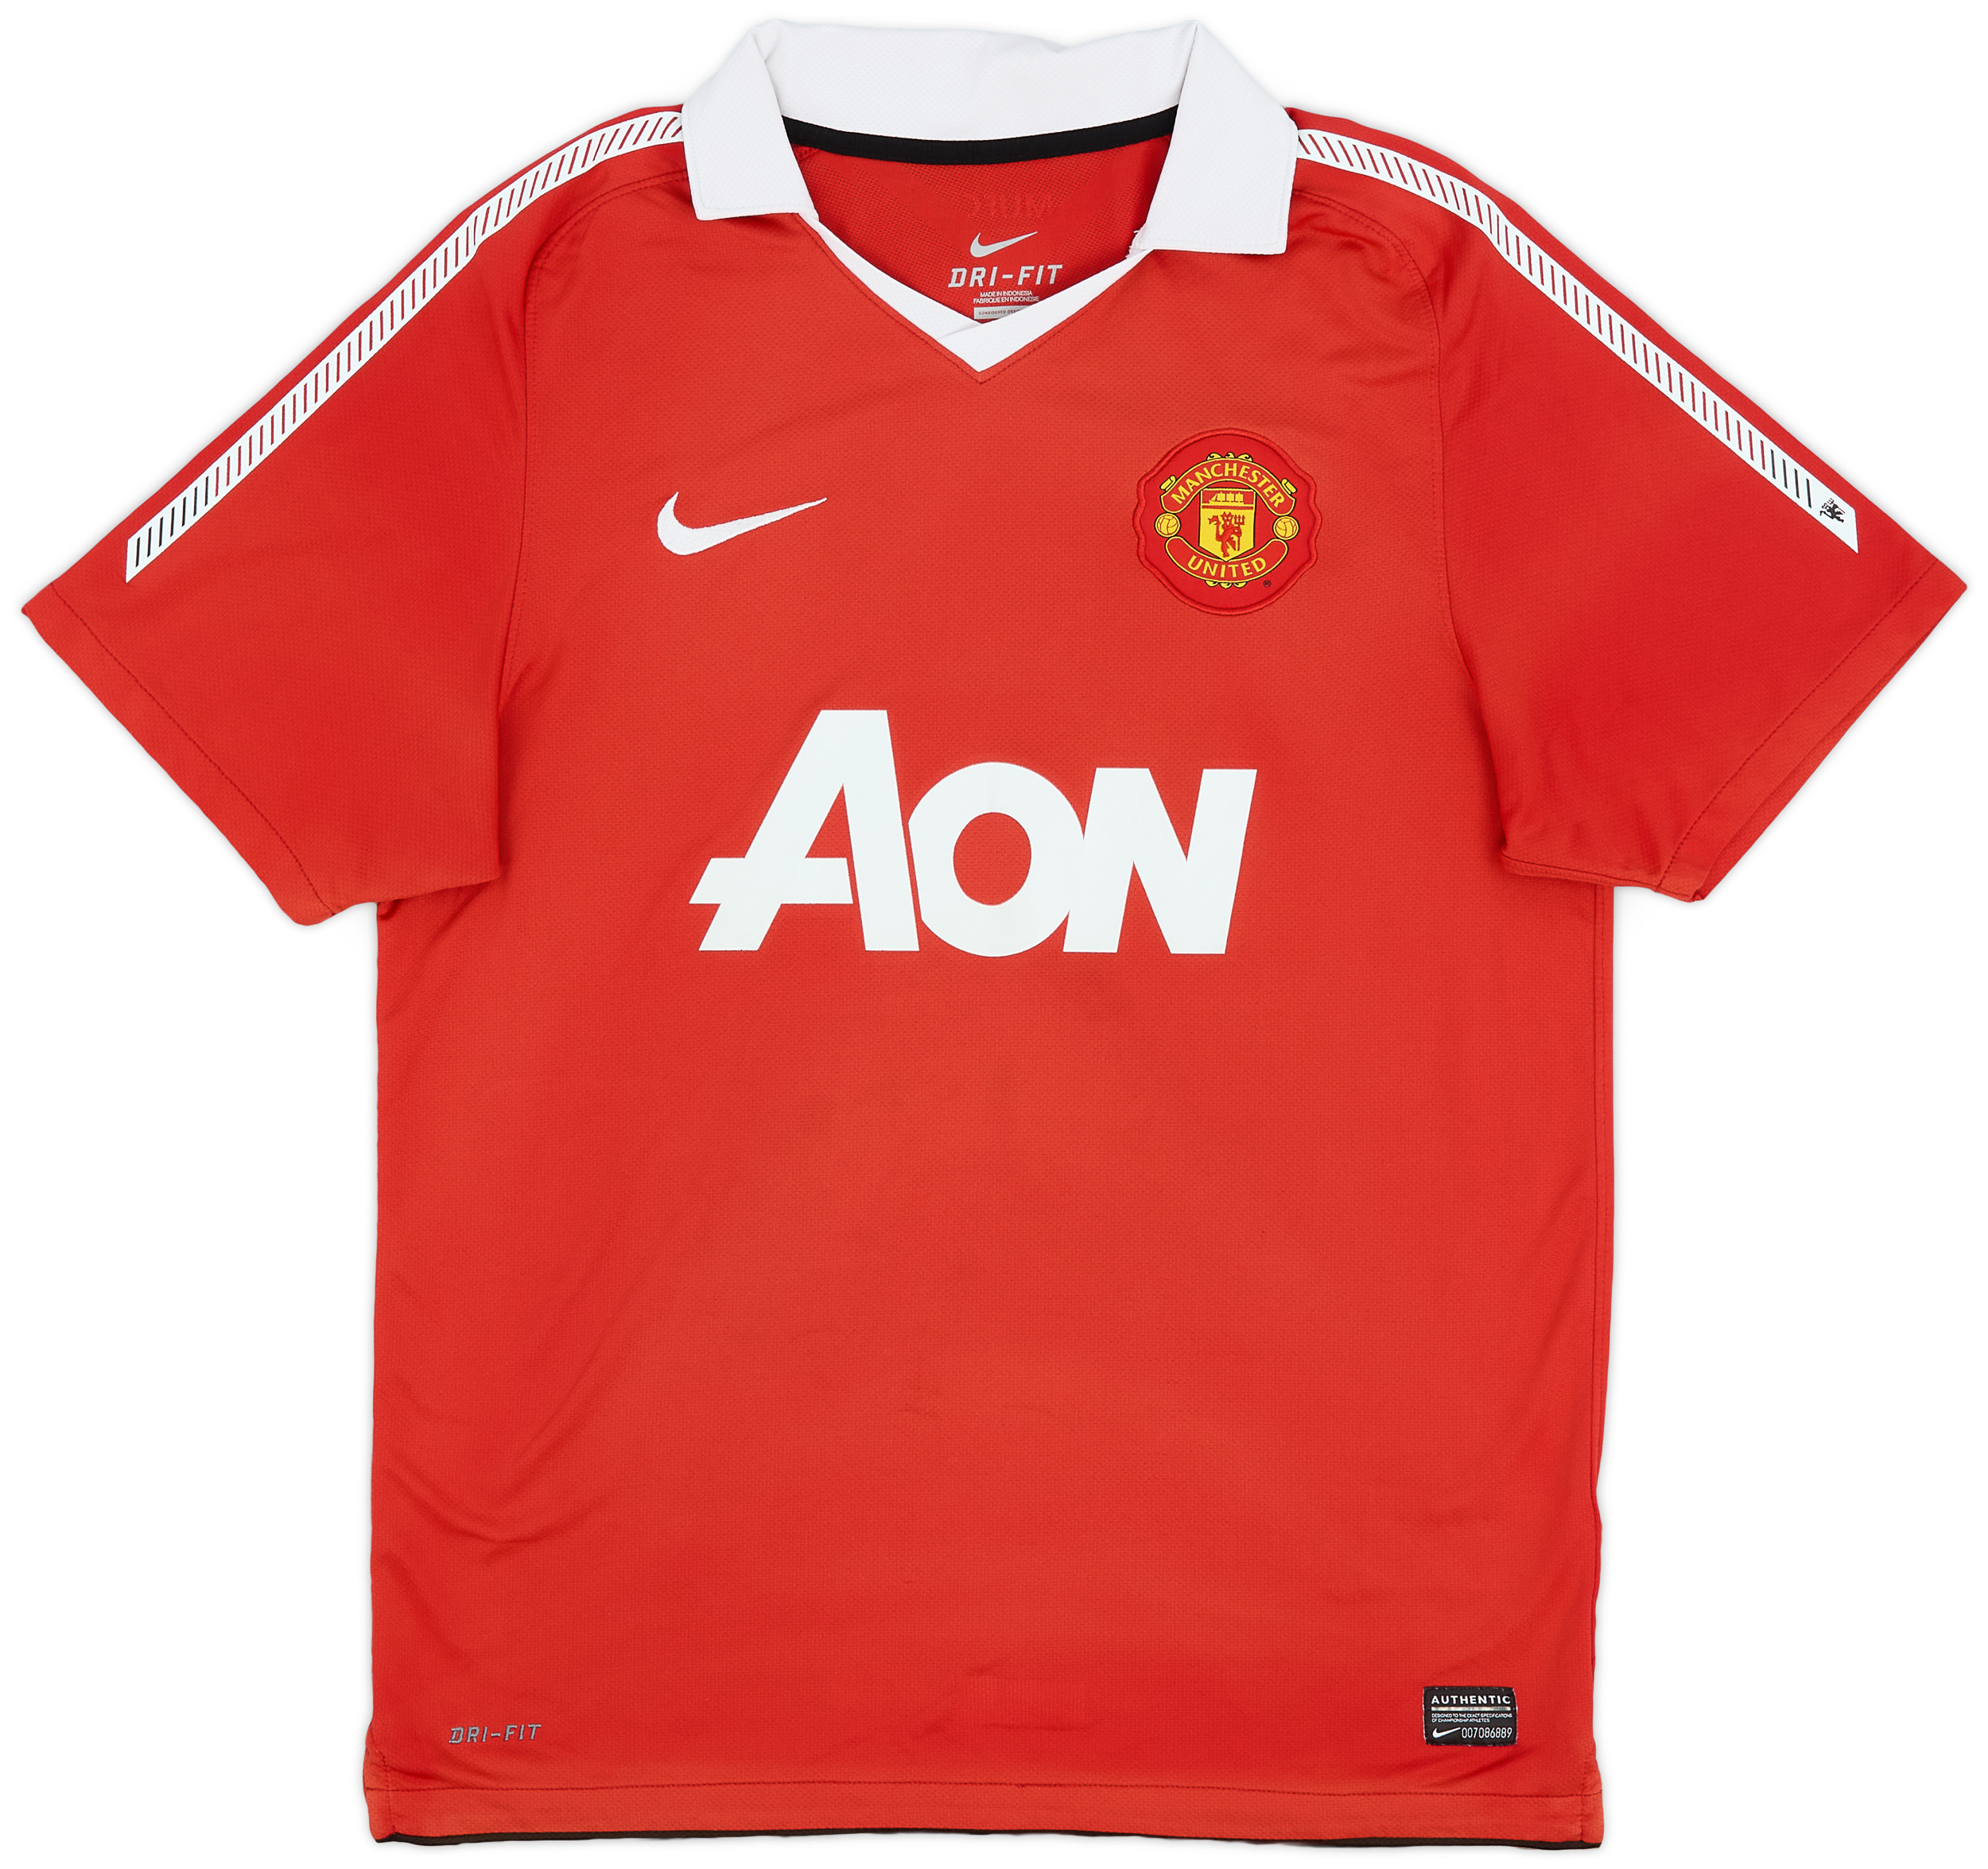 2010-11 Manchester United Home Shirt - 7/10 - ()